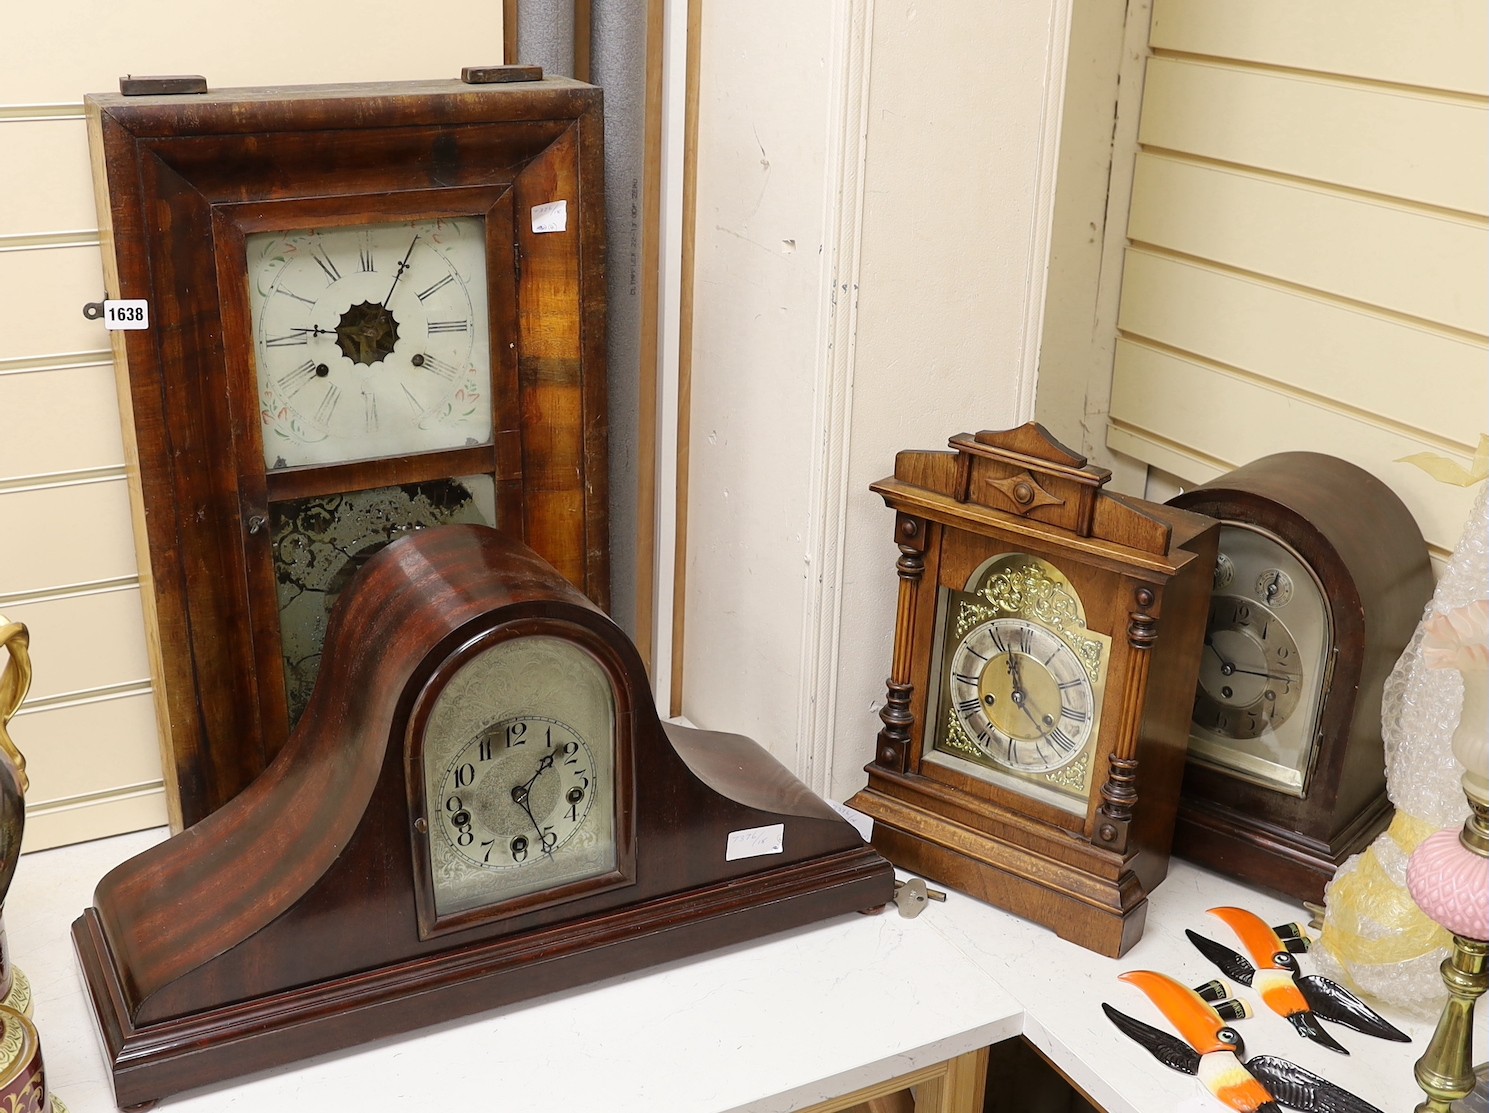 Two domed mantel clocks, a Connecticut shelf clock and a Black Forest mantel clock